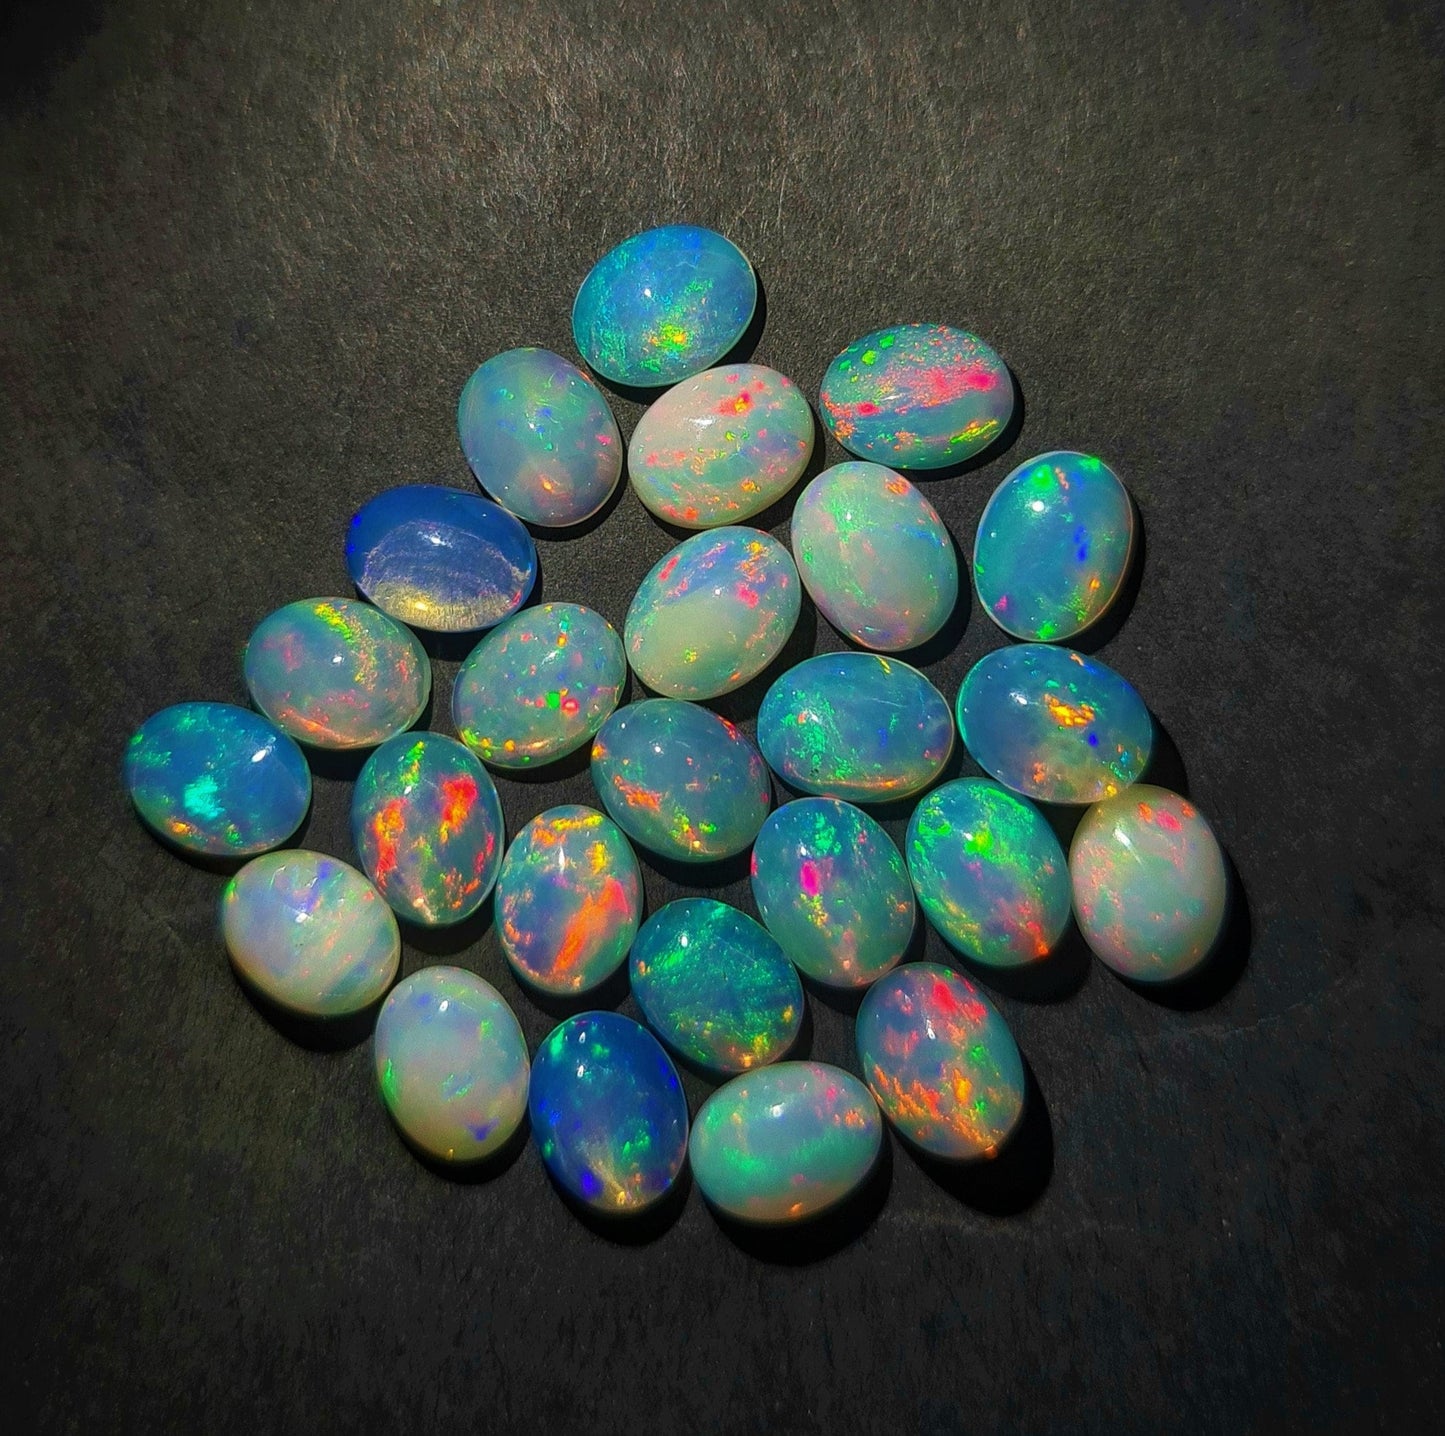 Natural Ethiopian Opal 7x10 mm Oval Gemstone Cabochon, Calibrated Opal Stone, Multi Fire Opal Loose Stone For Jewelry Making.